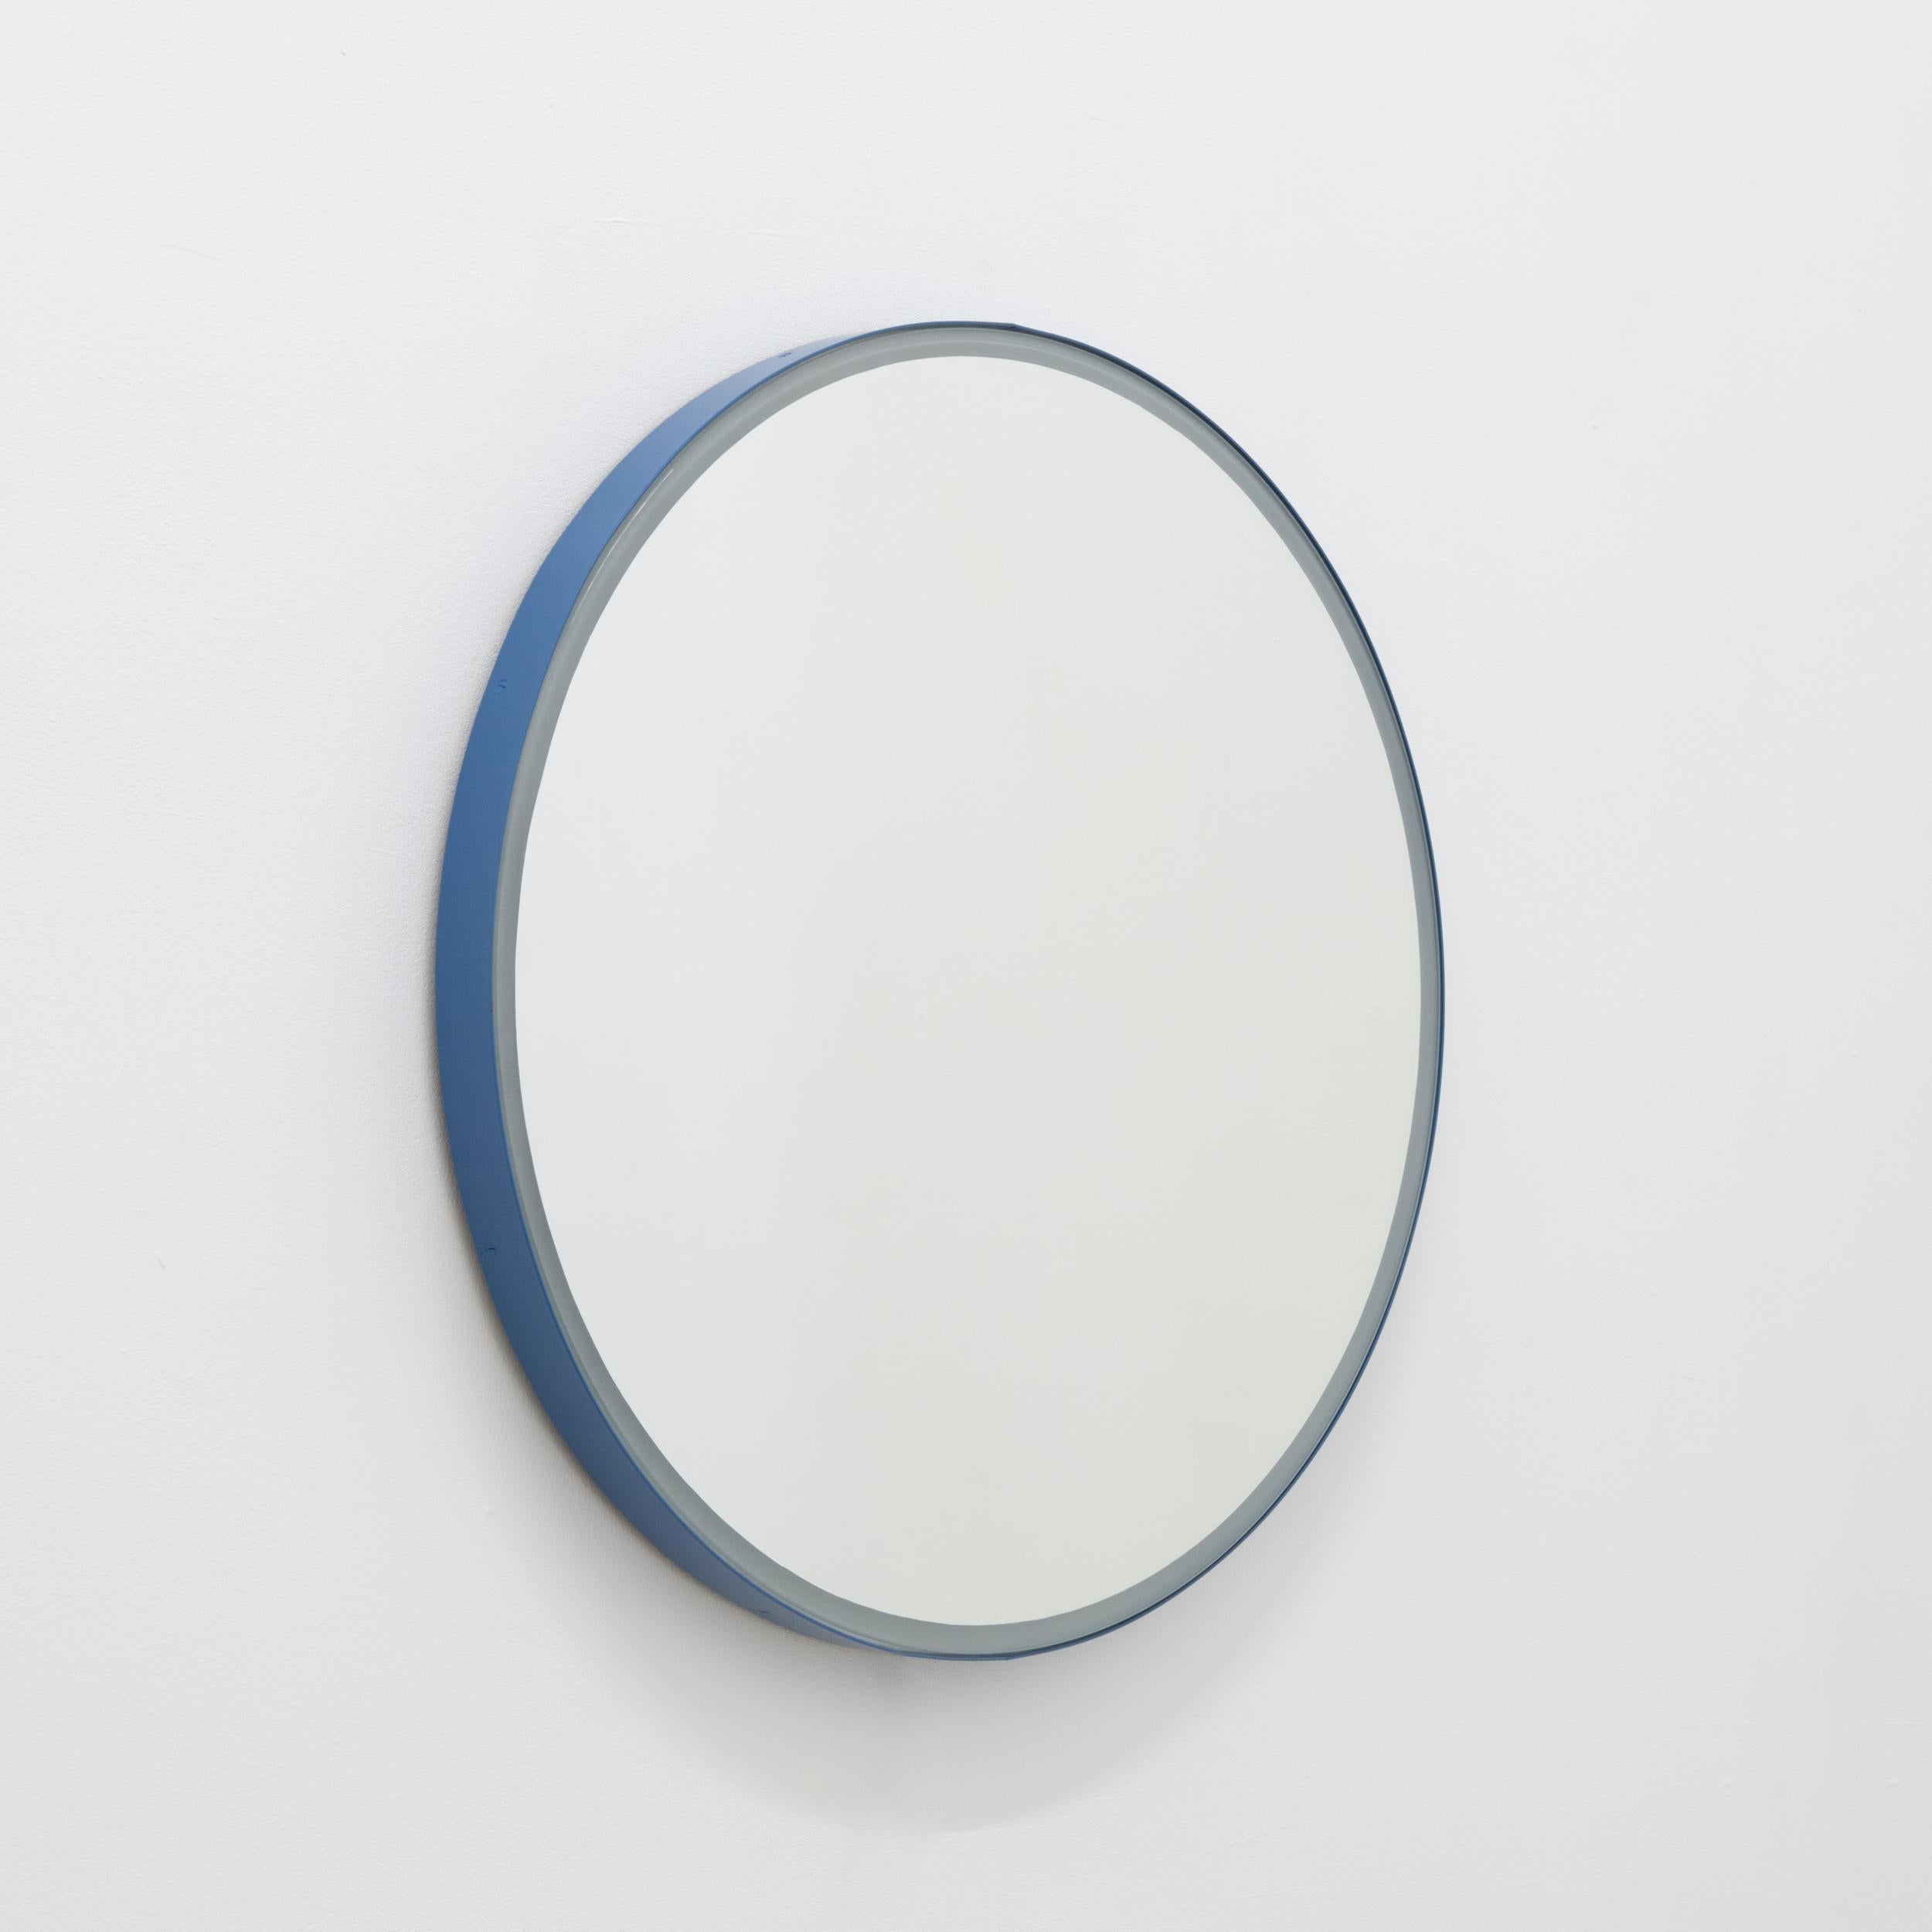 Orbis Front Illuminated Round Contemporary Mirror with Blue Frame, Medium For Sale 2